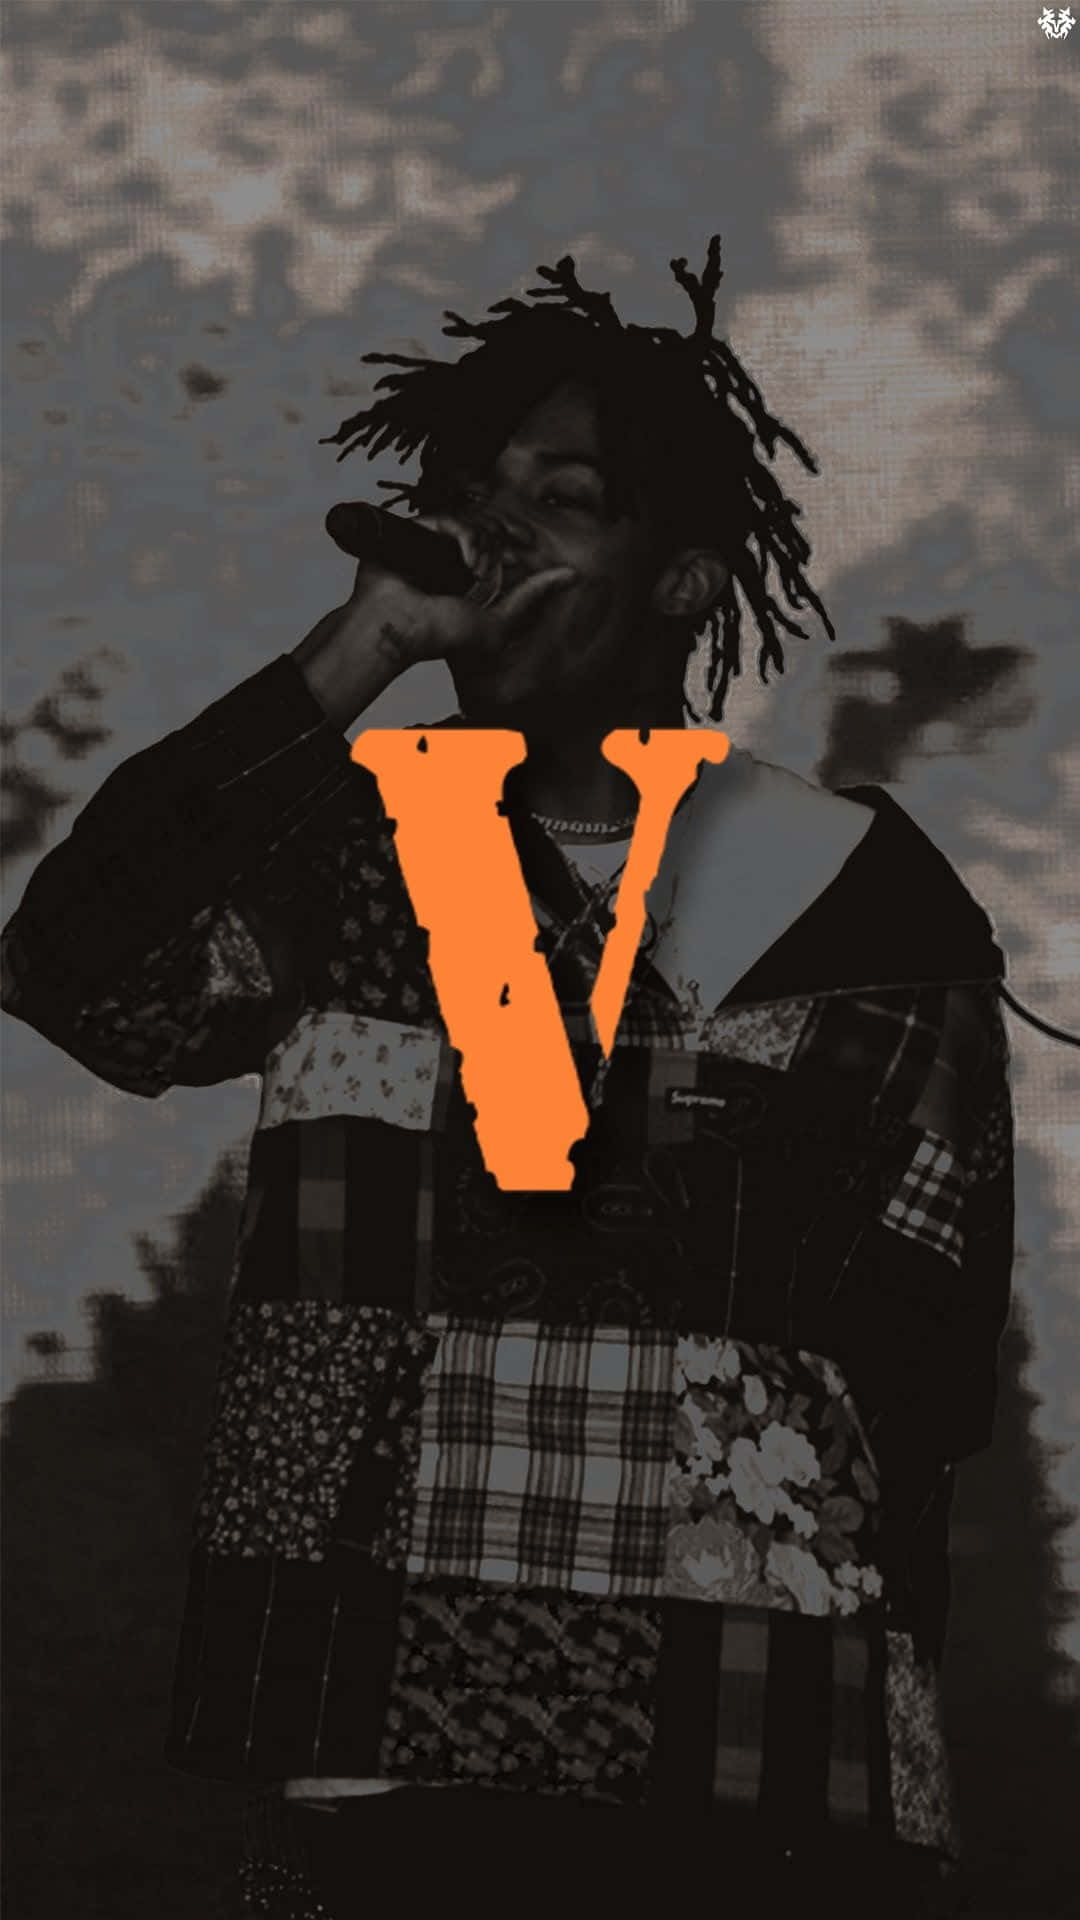 Vlone Iphone Mand Micron tilbagecover Wallpaper